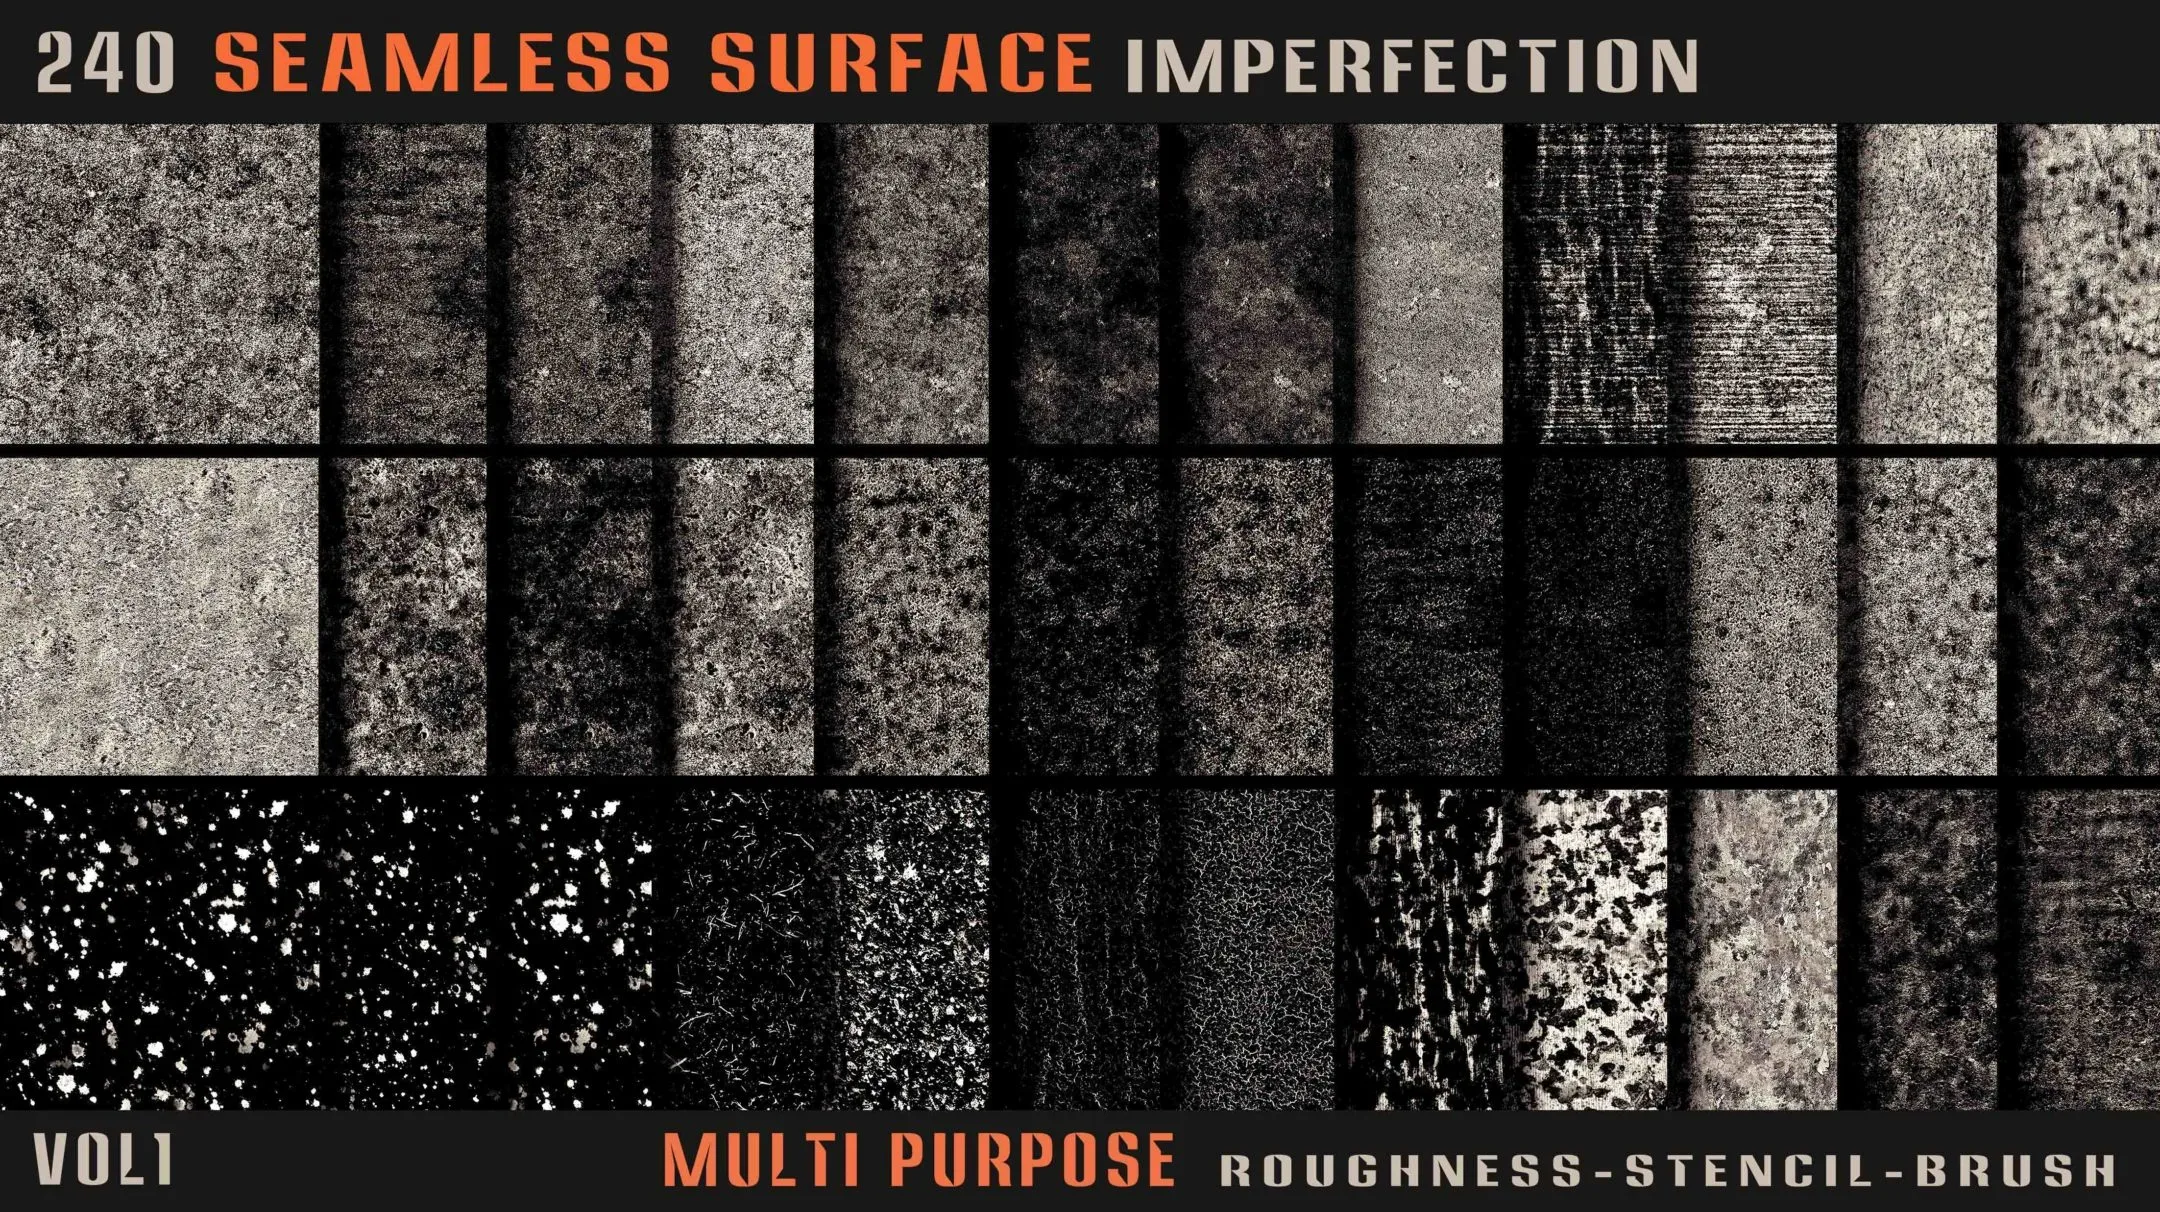 240 seamless surface imperfection-vol1